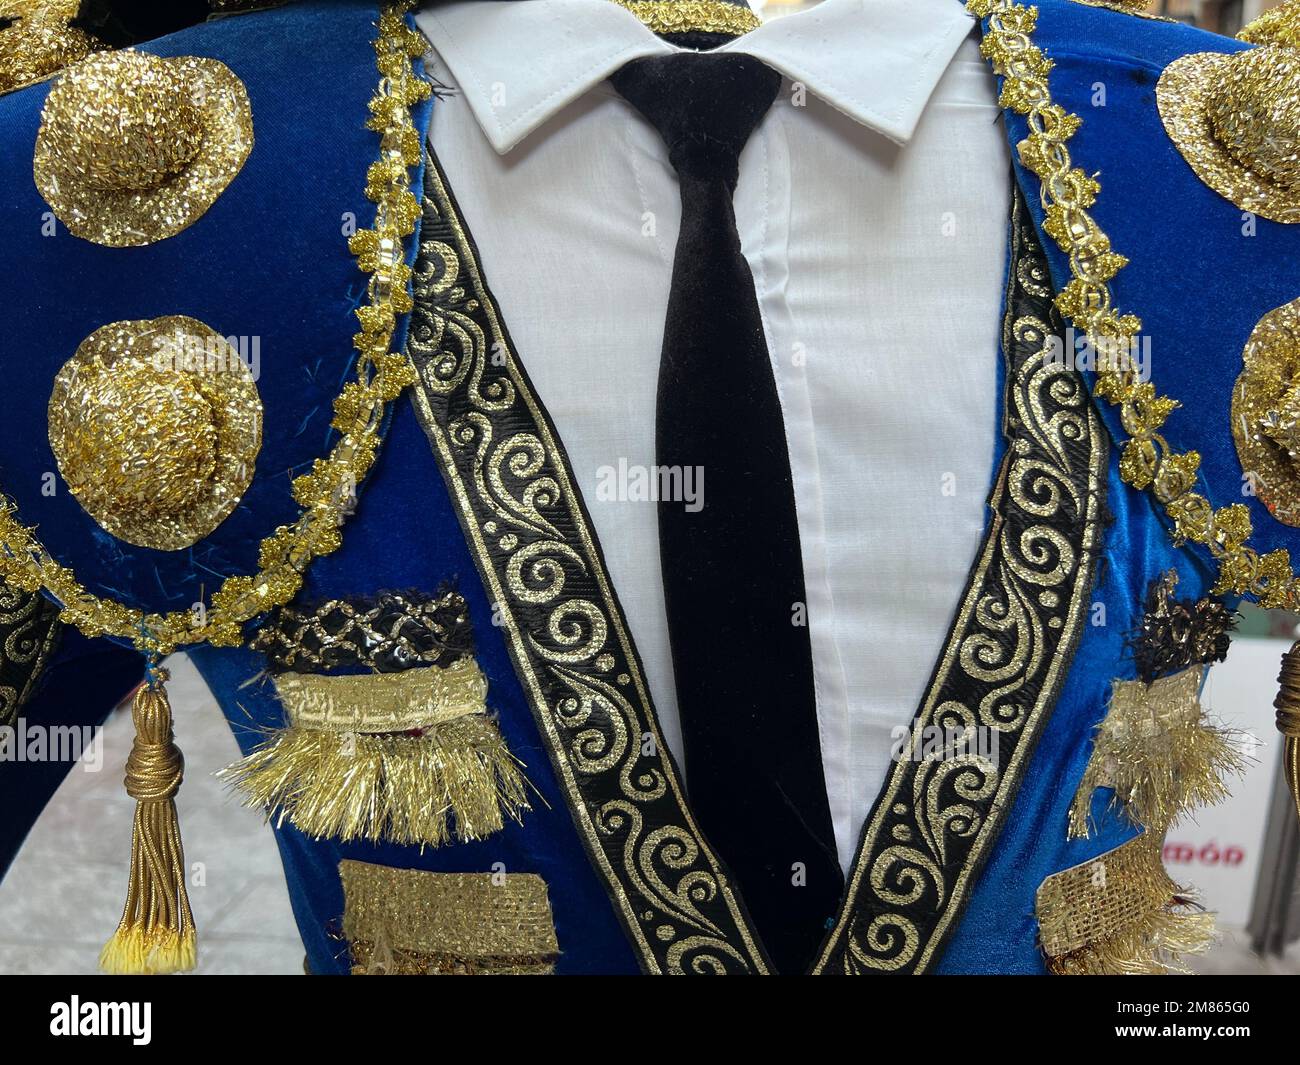 traditional costume of bullfighters Stock Photo